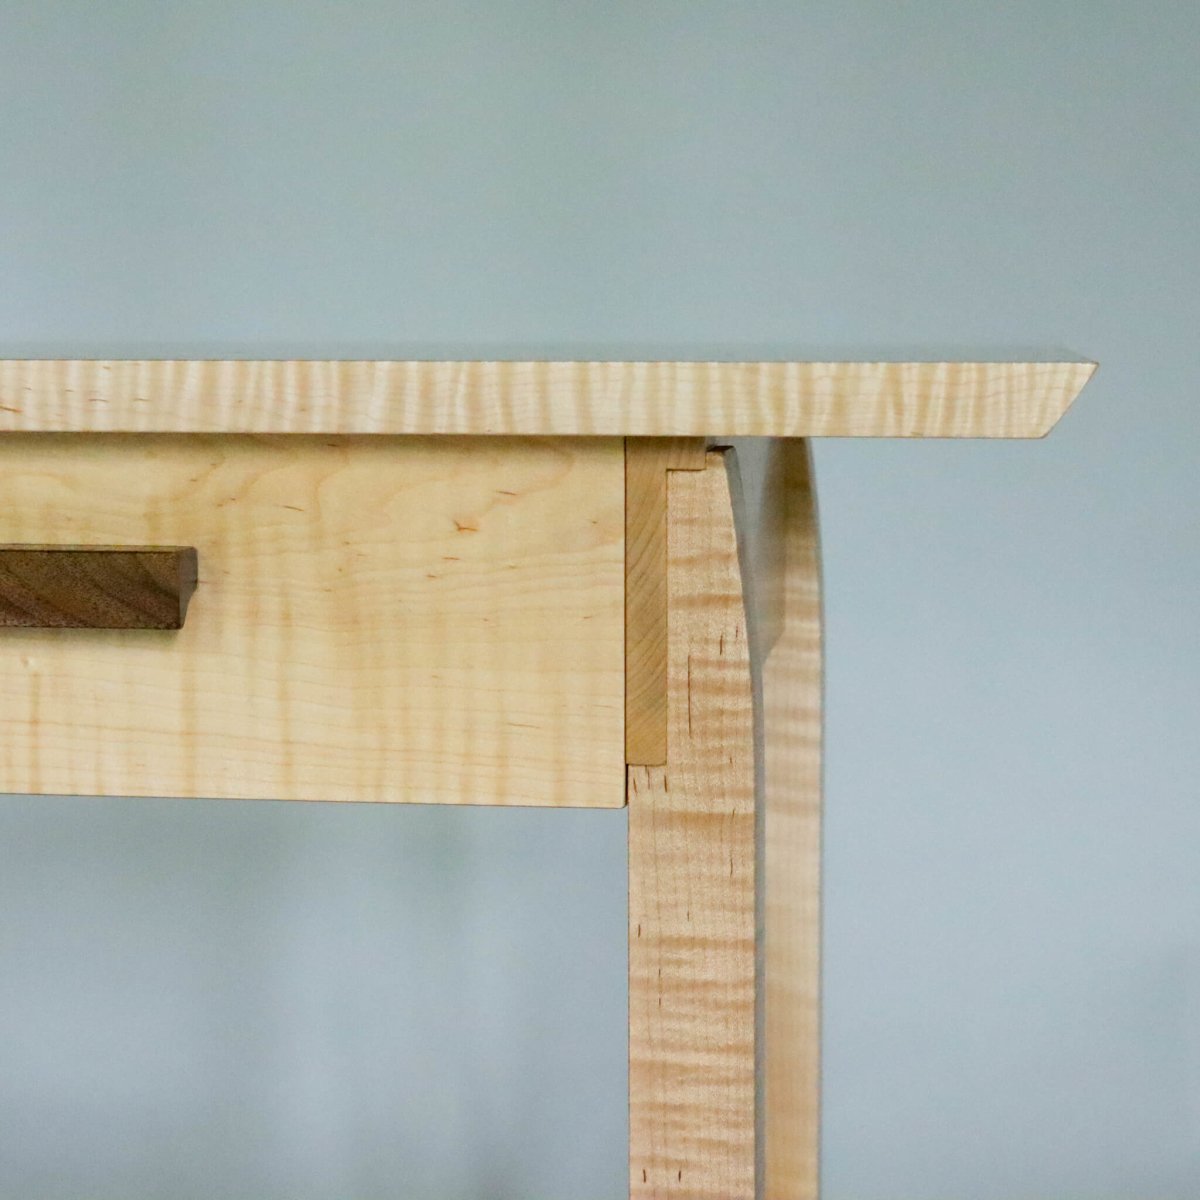 unique joinery details on these artisan end tables with drawers for small nightstands in a contemporary bedroom design- by Mokuzai Furniture